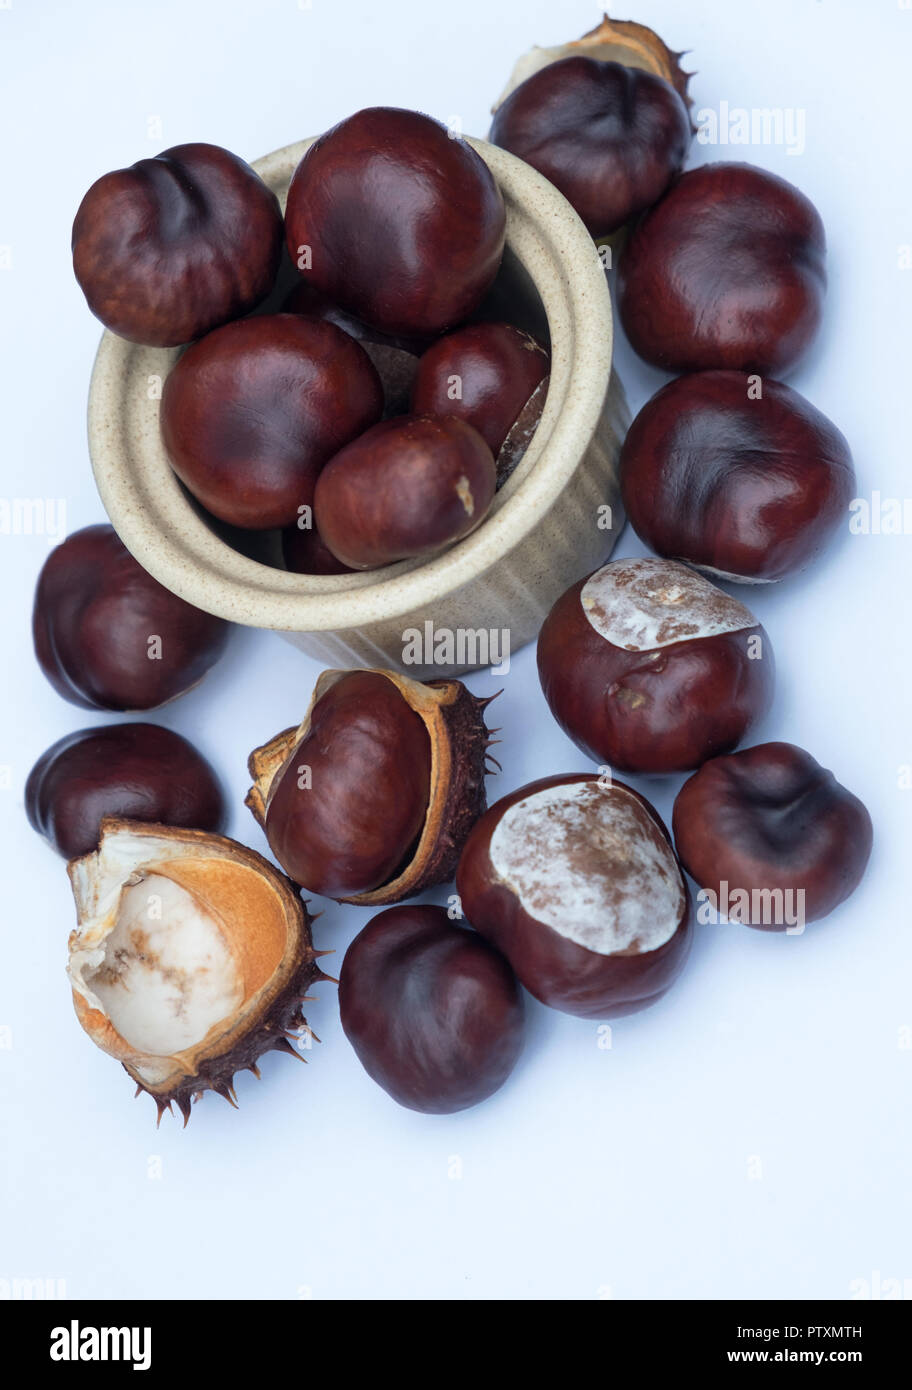 View of Conkers, the seed of the Horse Chestnut tree ( Aesculus hippocastanum ). They are attached to strings for use in a traditional children's game Stock Photo